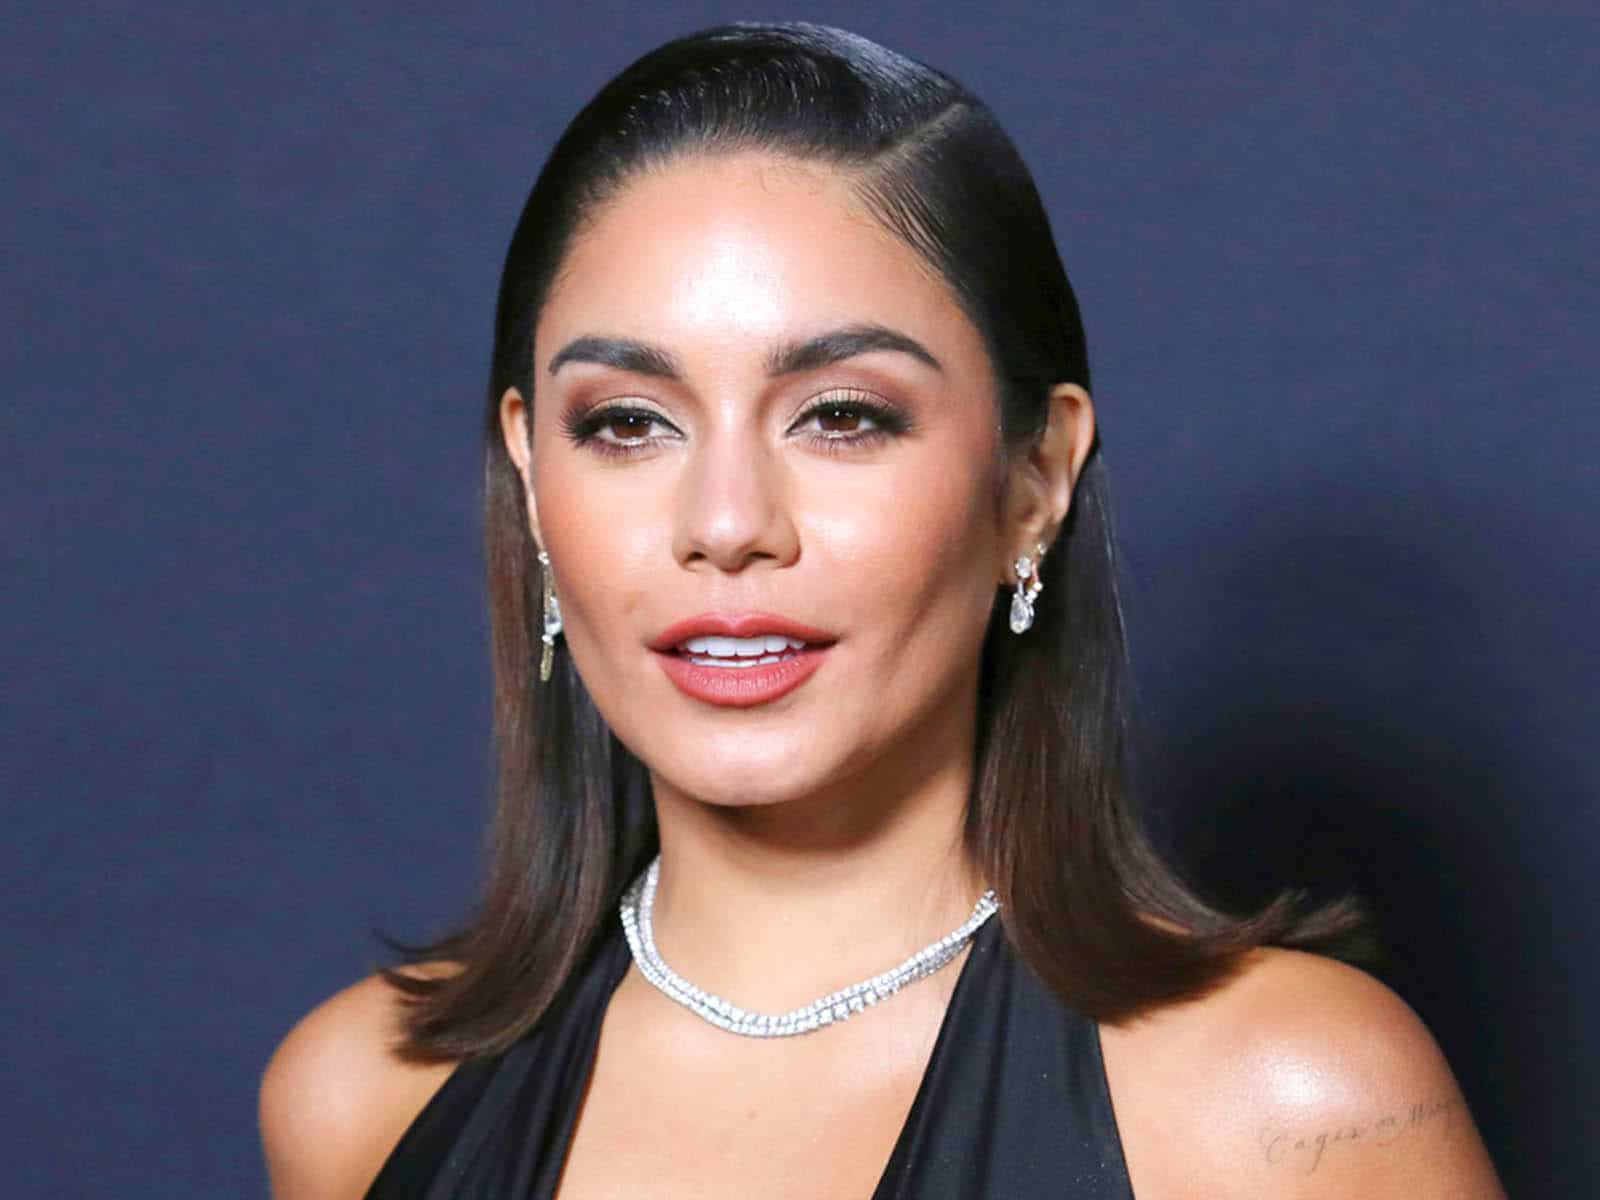 Vanessa Hudgens says she can talk to ghosts